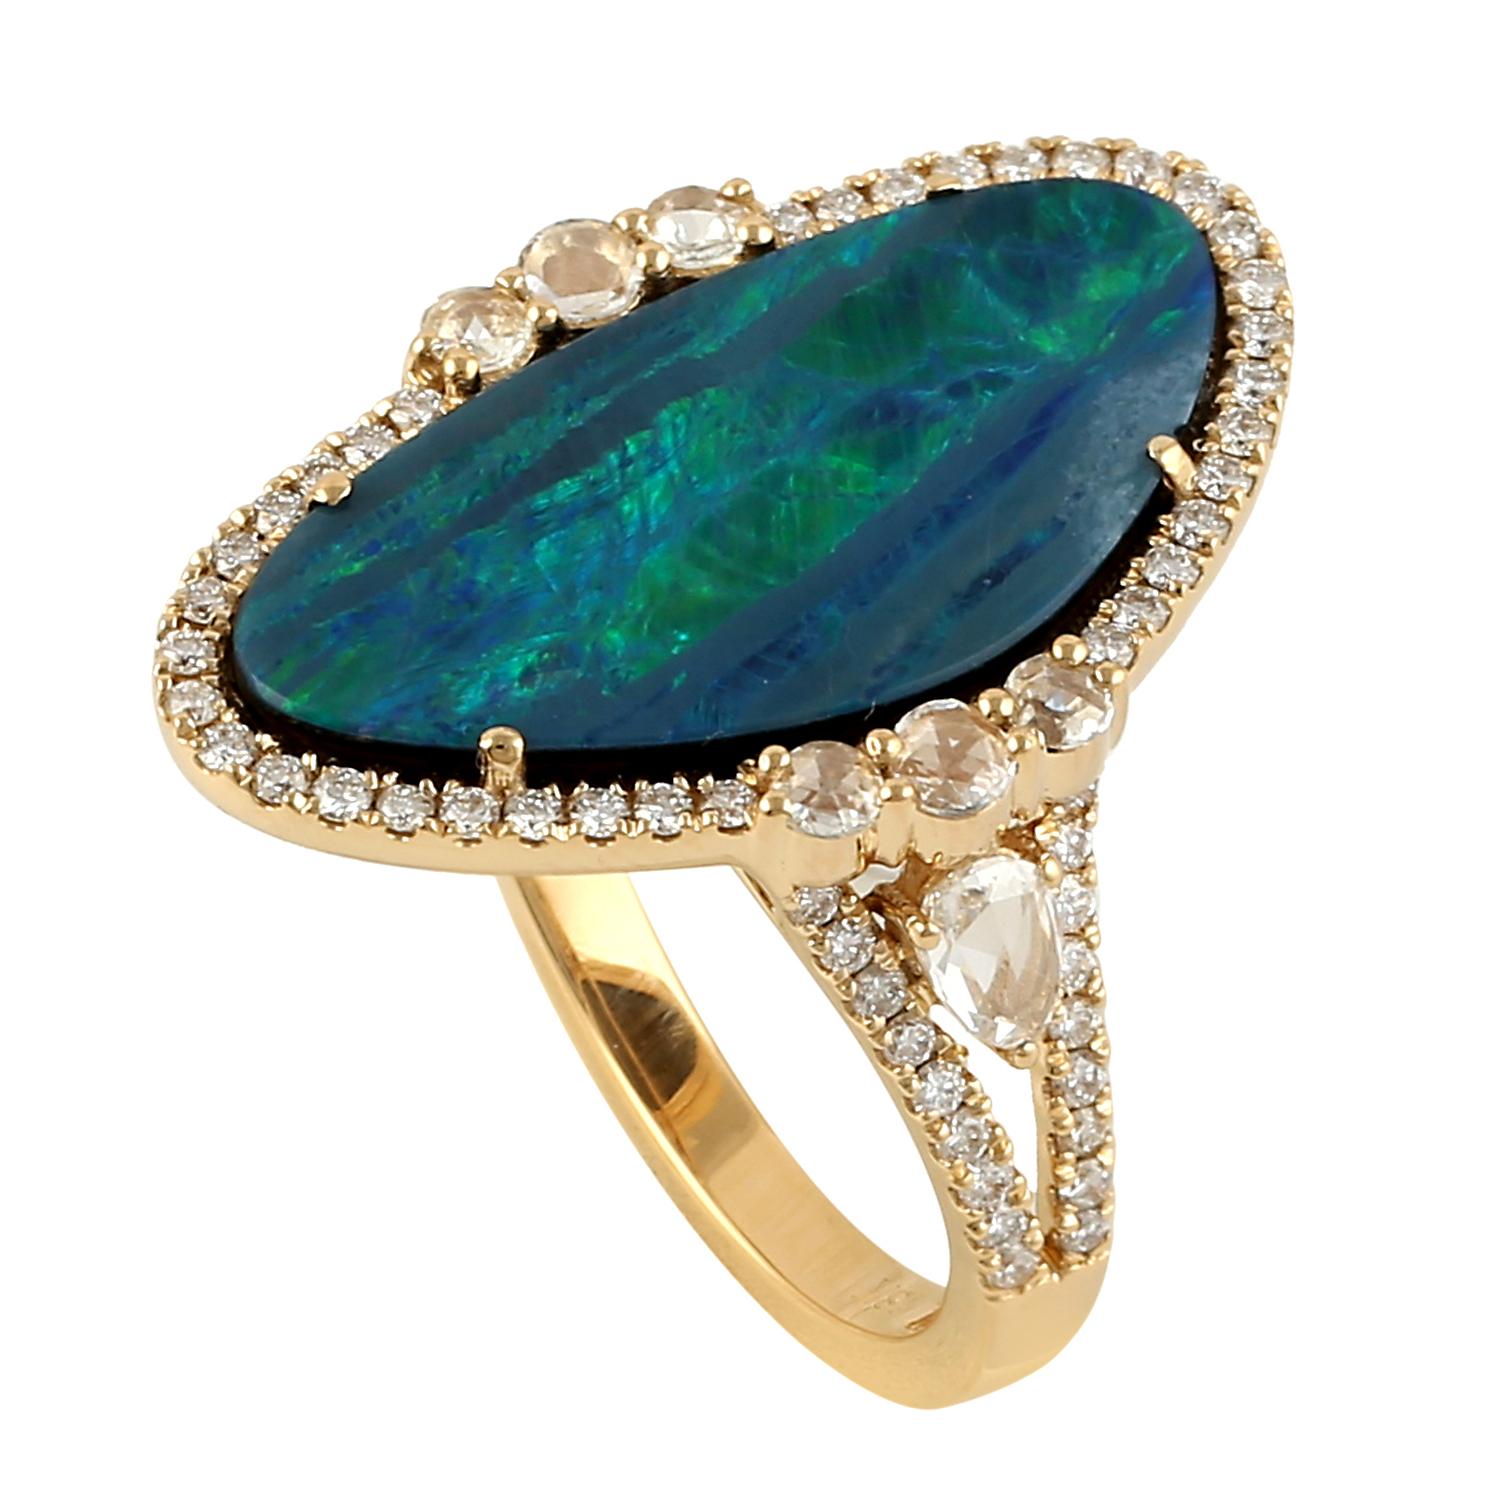 Modern Opal & Diamond Ring With Rose Cut Diamond On Side Made in 18k Yellow Gold For Sale